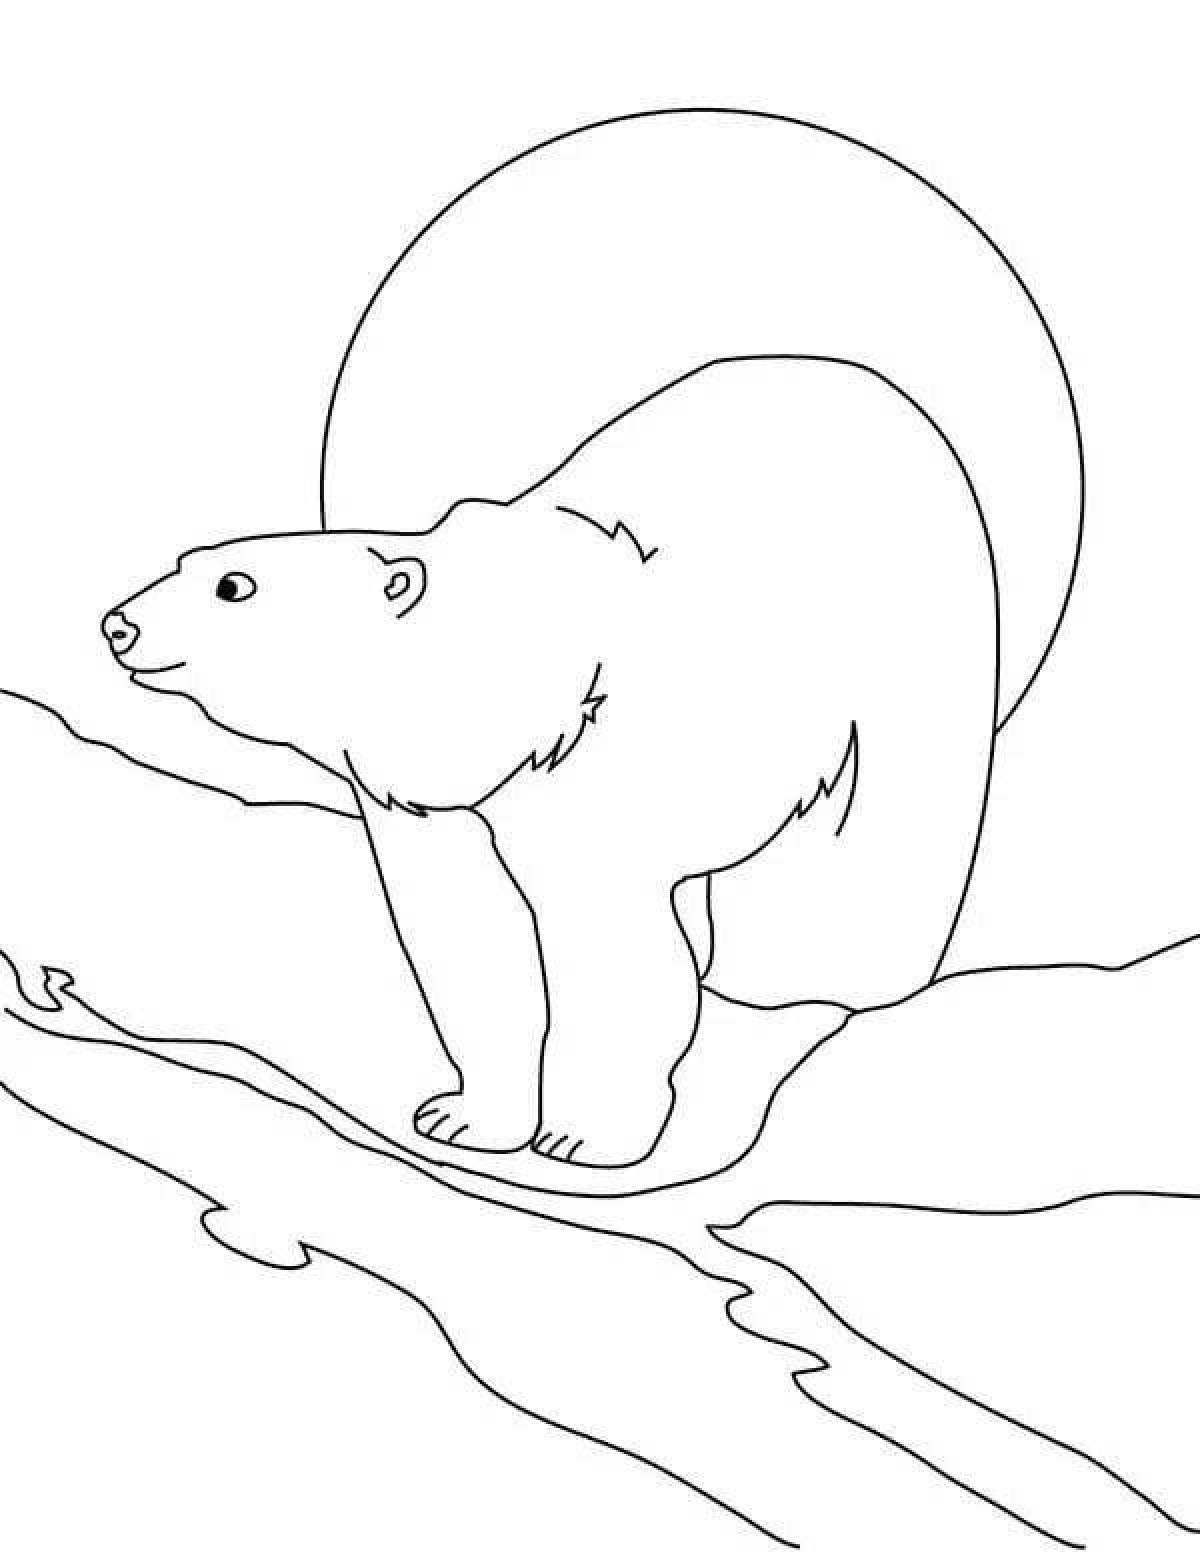 Colouring for children with colorful arctic animals